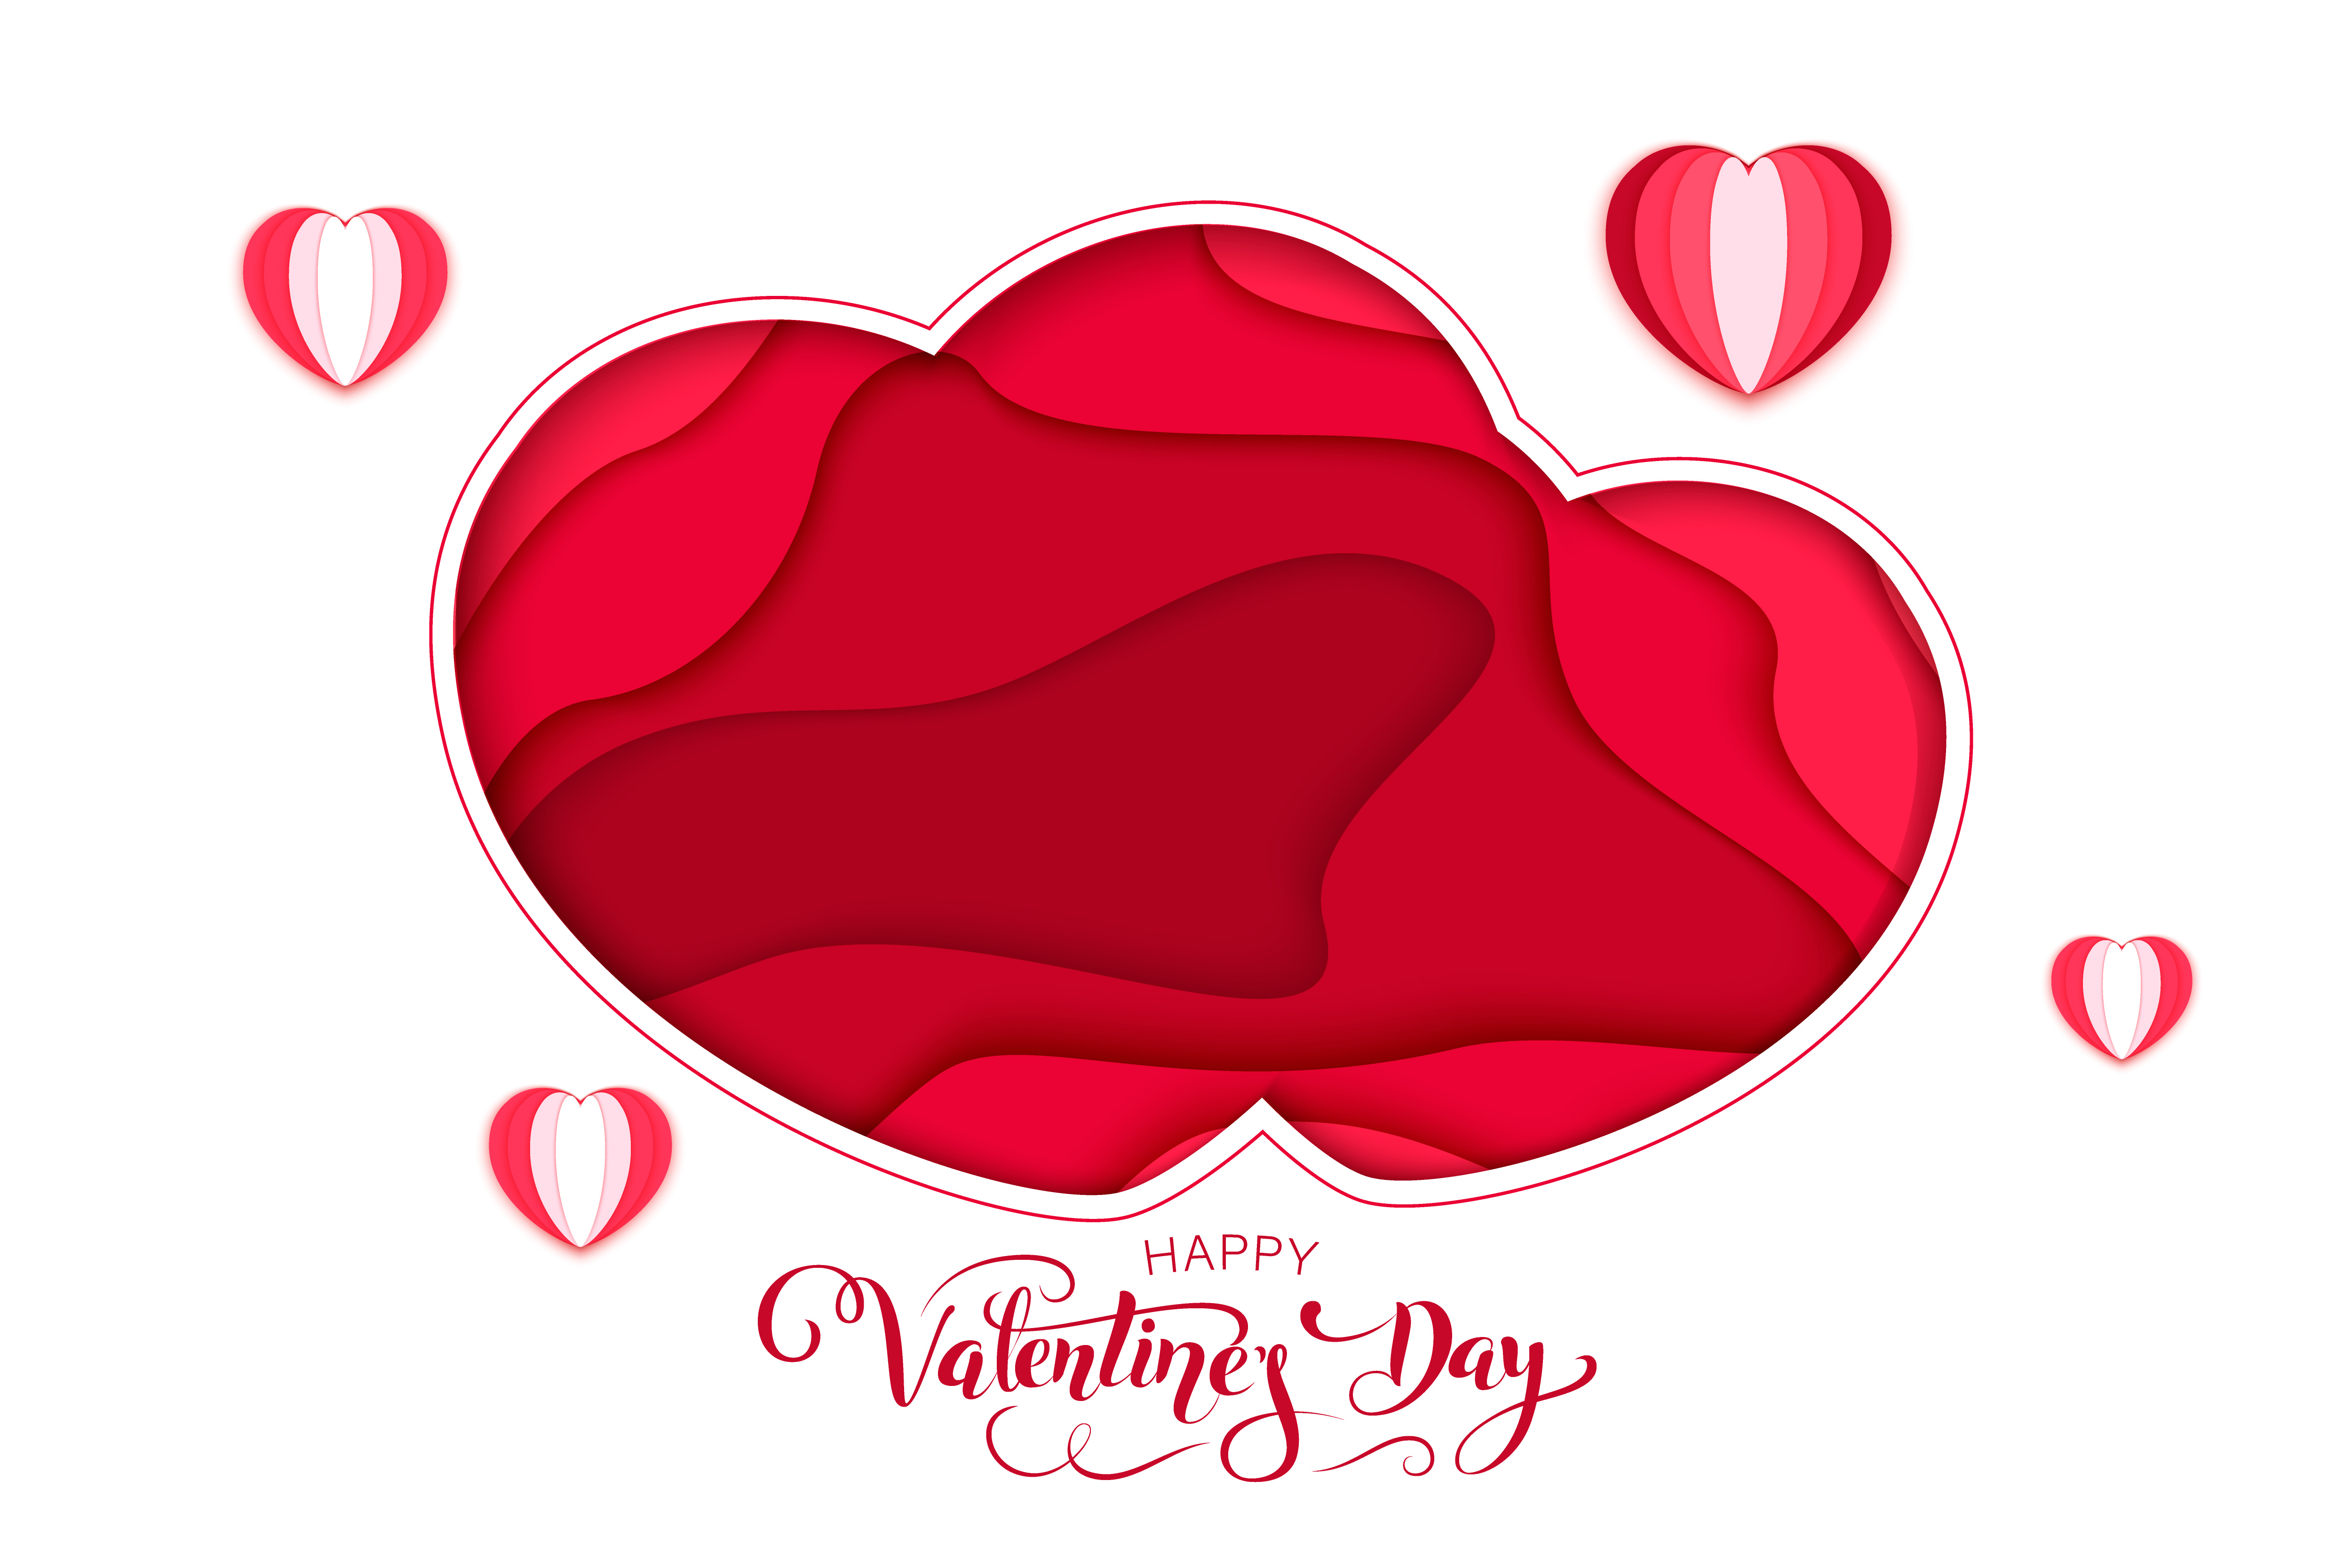 Valentine's day vector design concept, free image by rawpixel.com / sasi